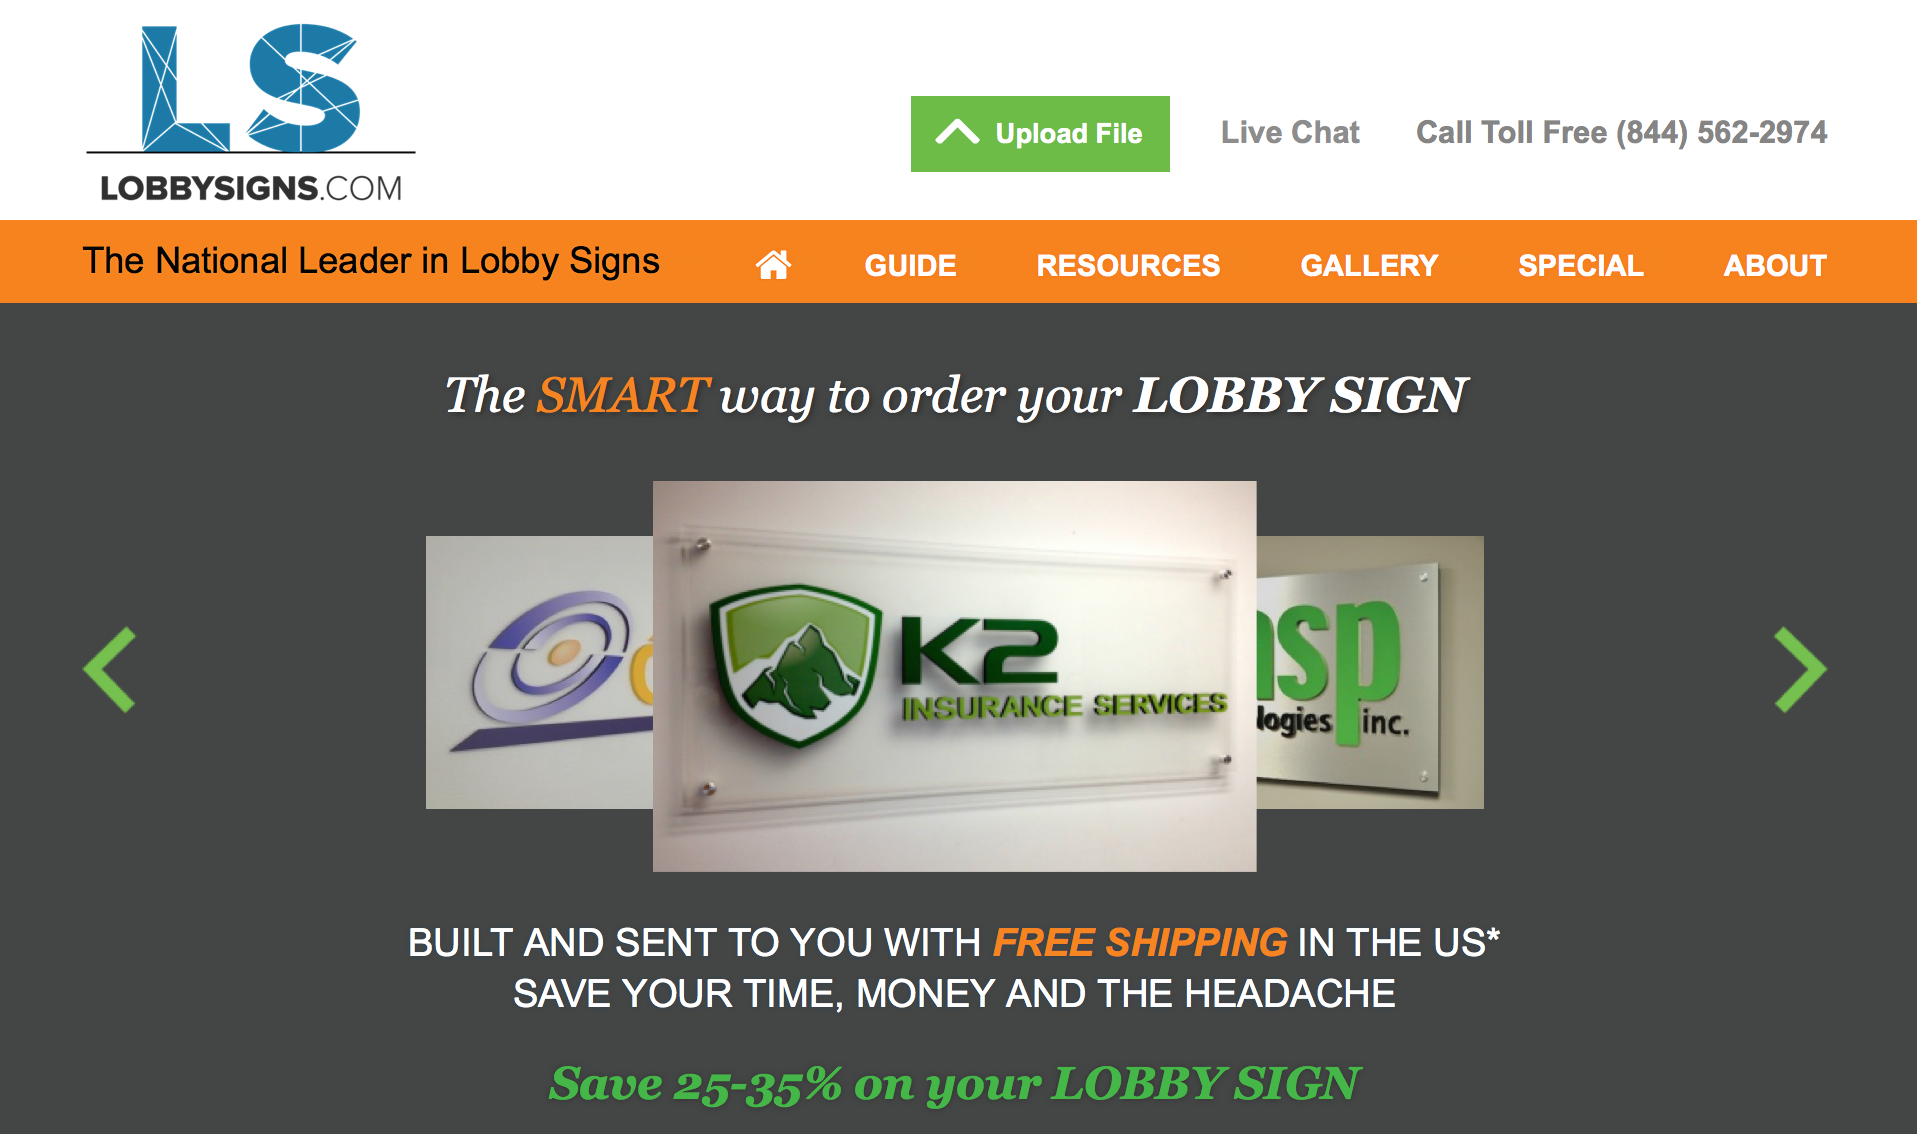 picture of lobbysigns.com website home page which allows for practicality of ordering online signs